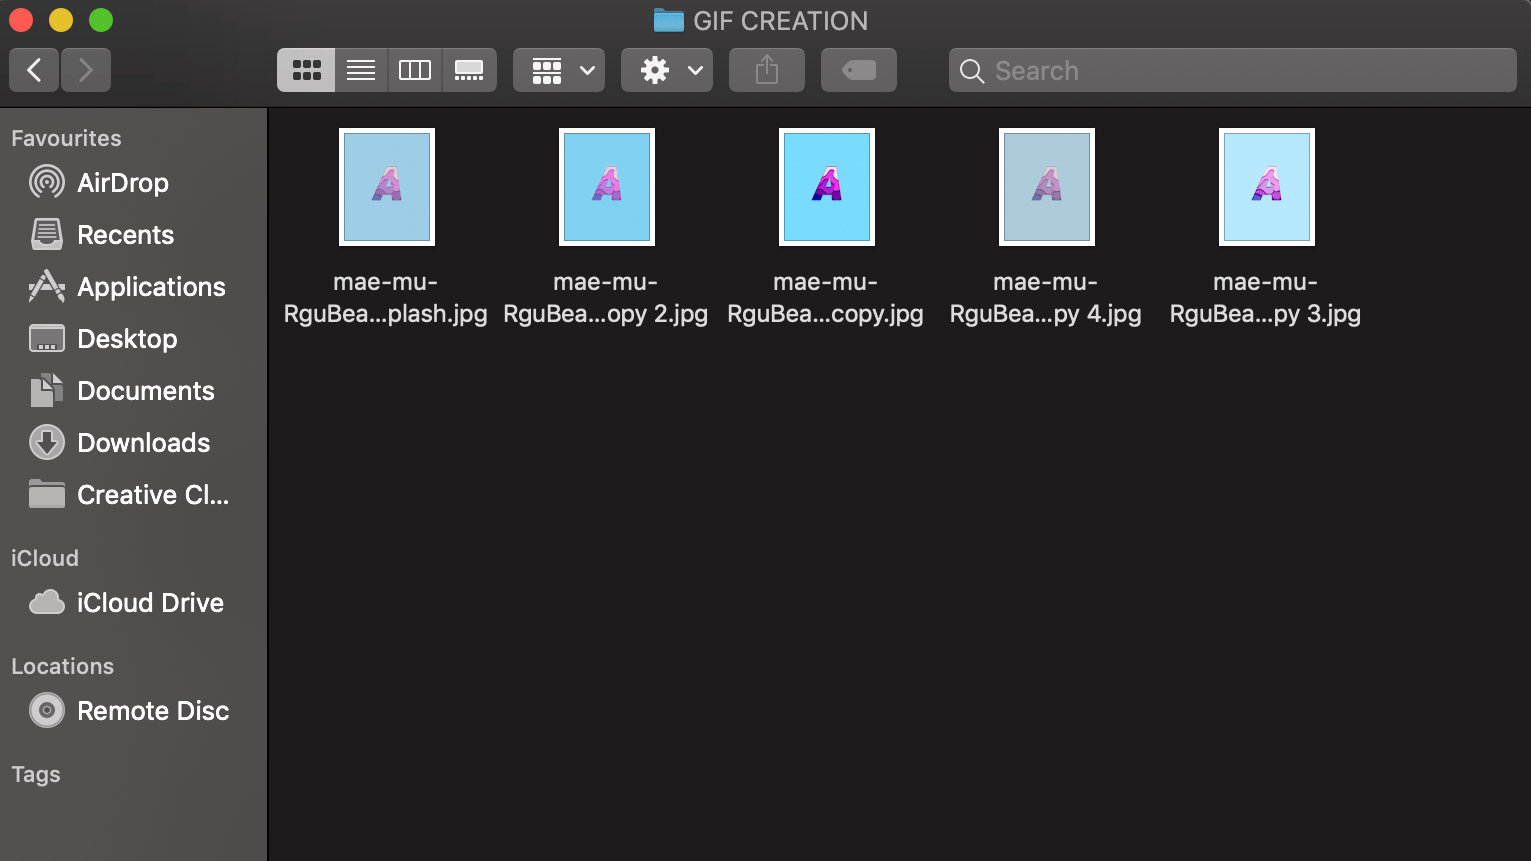 Creating a GIF sticker using a collection of still images